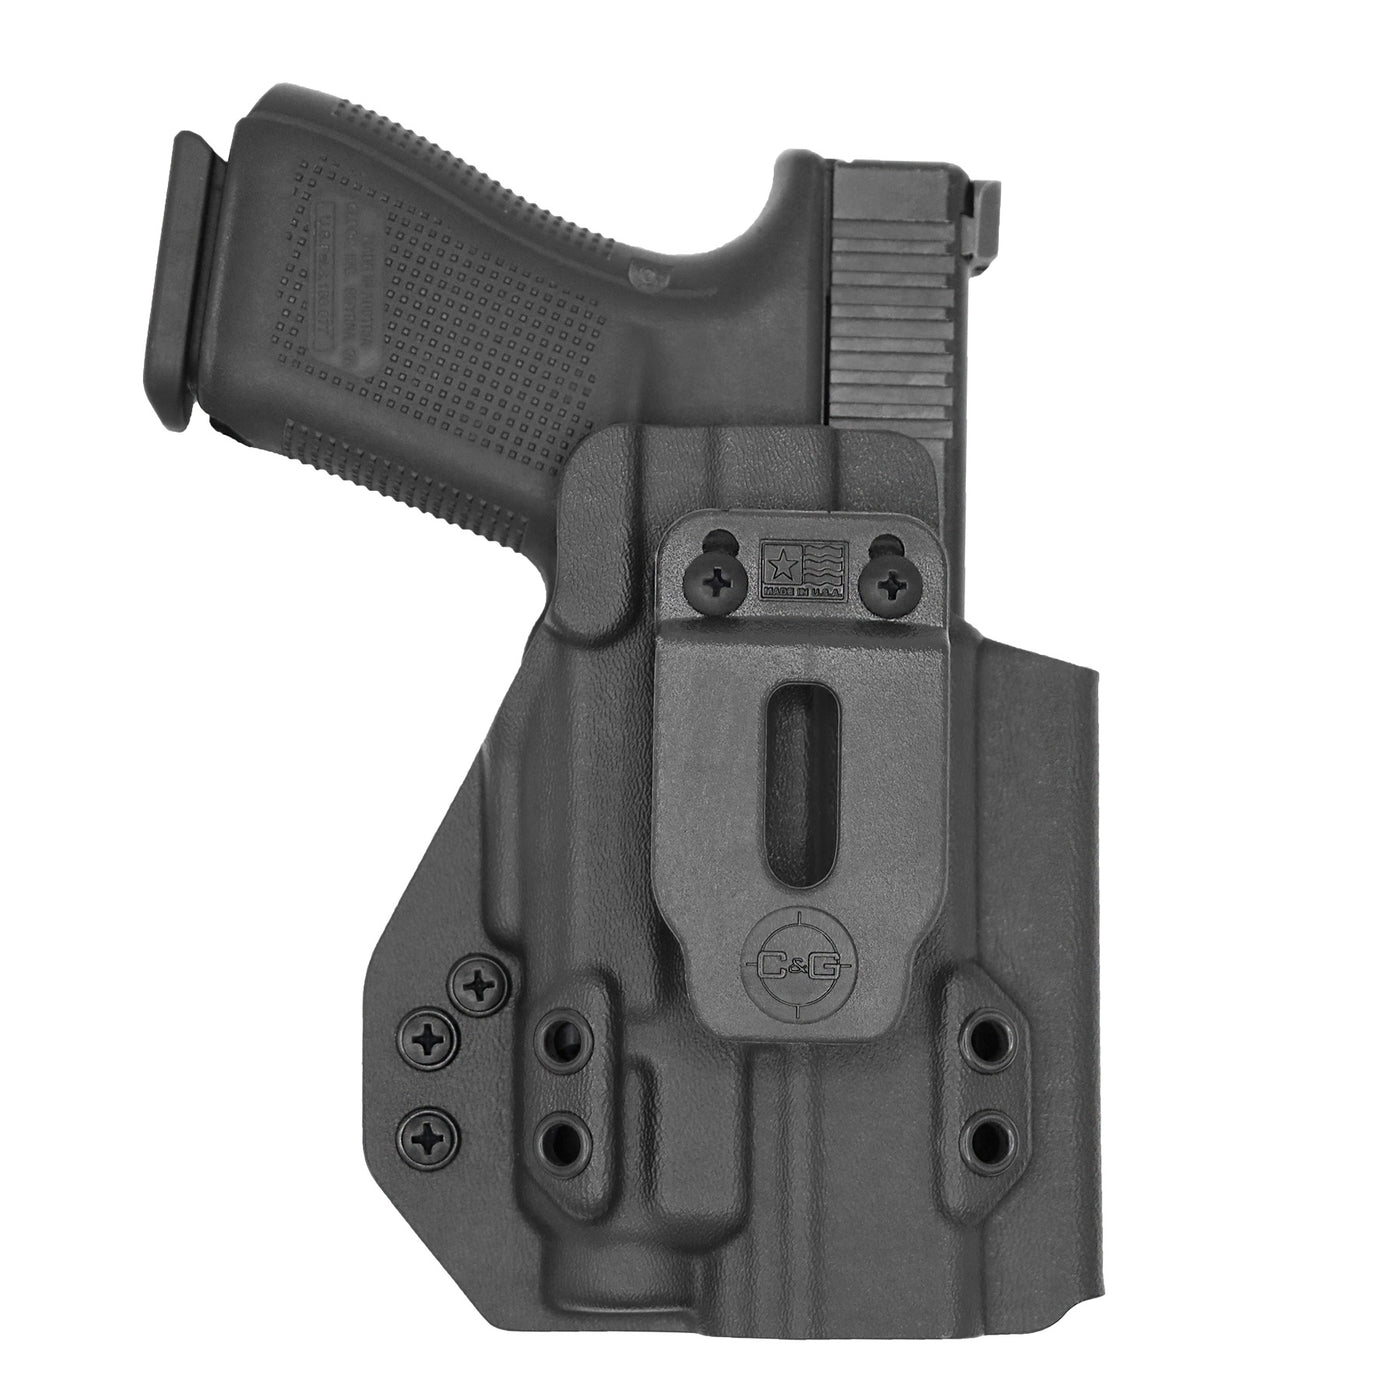 C&G Holsters IWB TLR7 holster